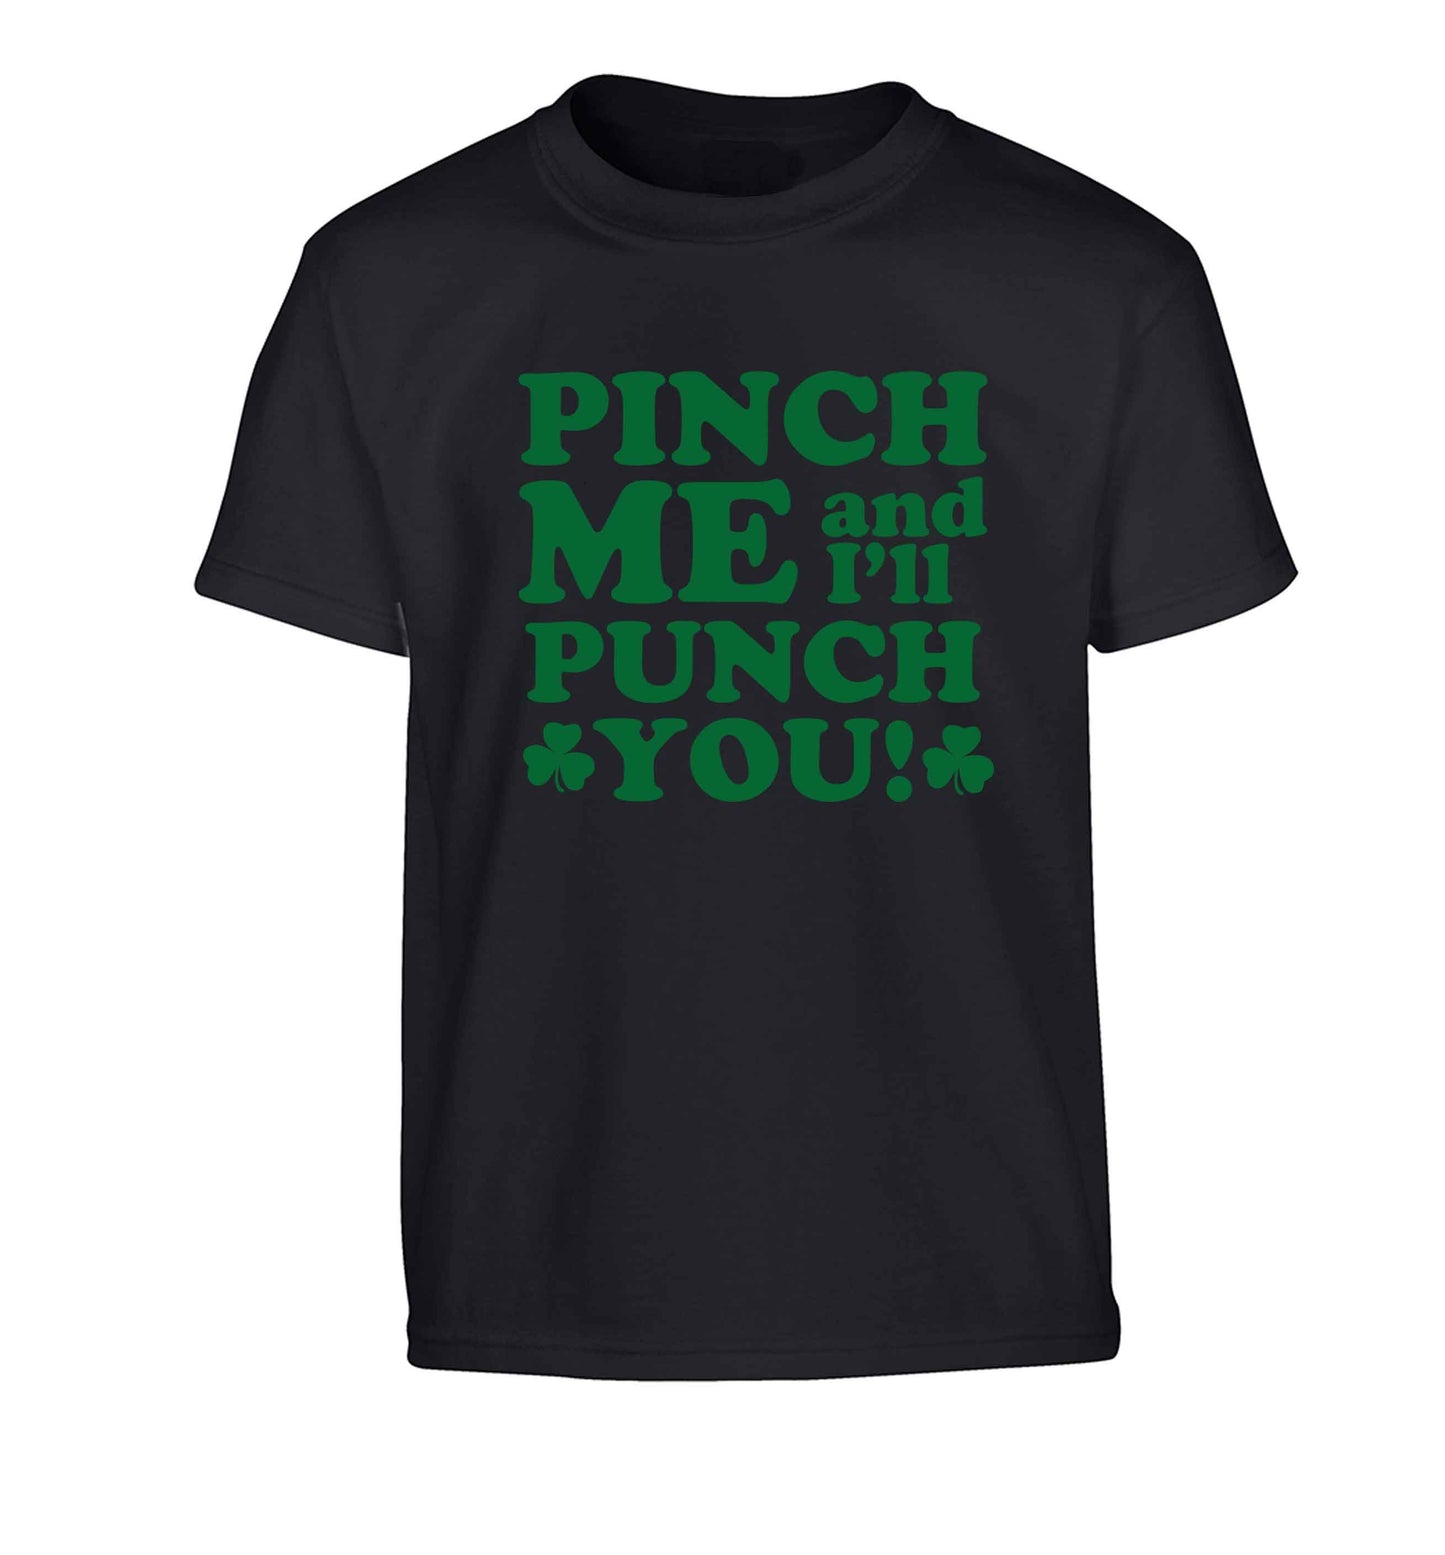 Pinch me and I'll punch you Children's black Tshirt 12-13 Years